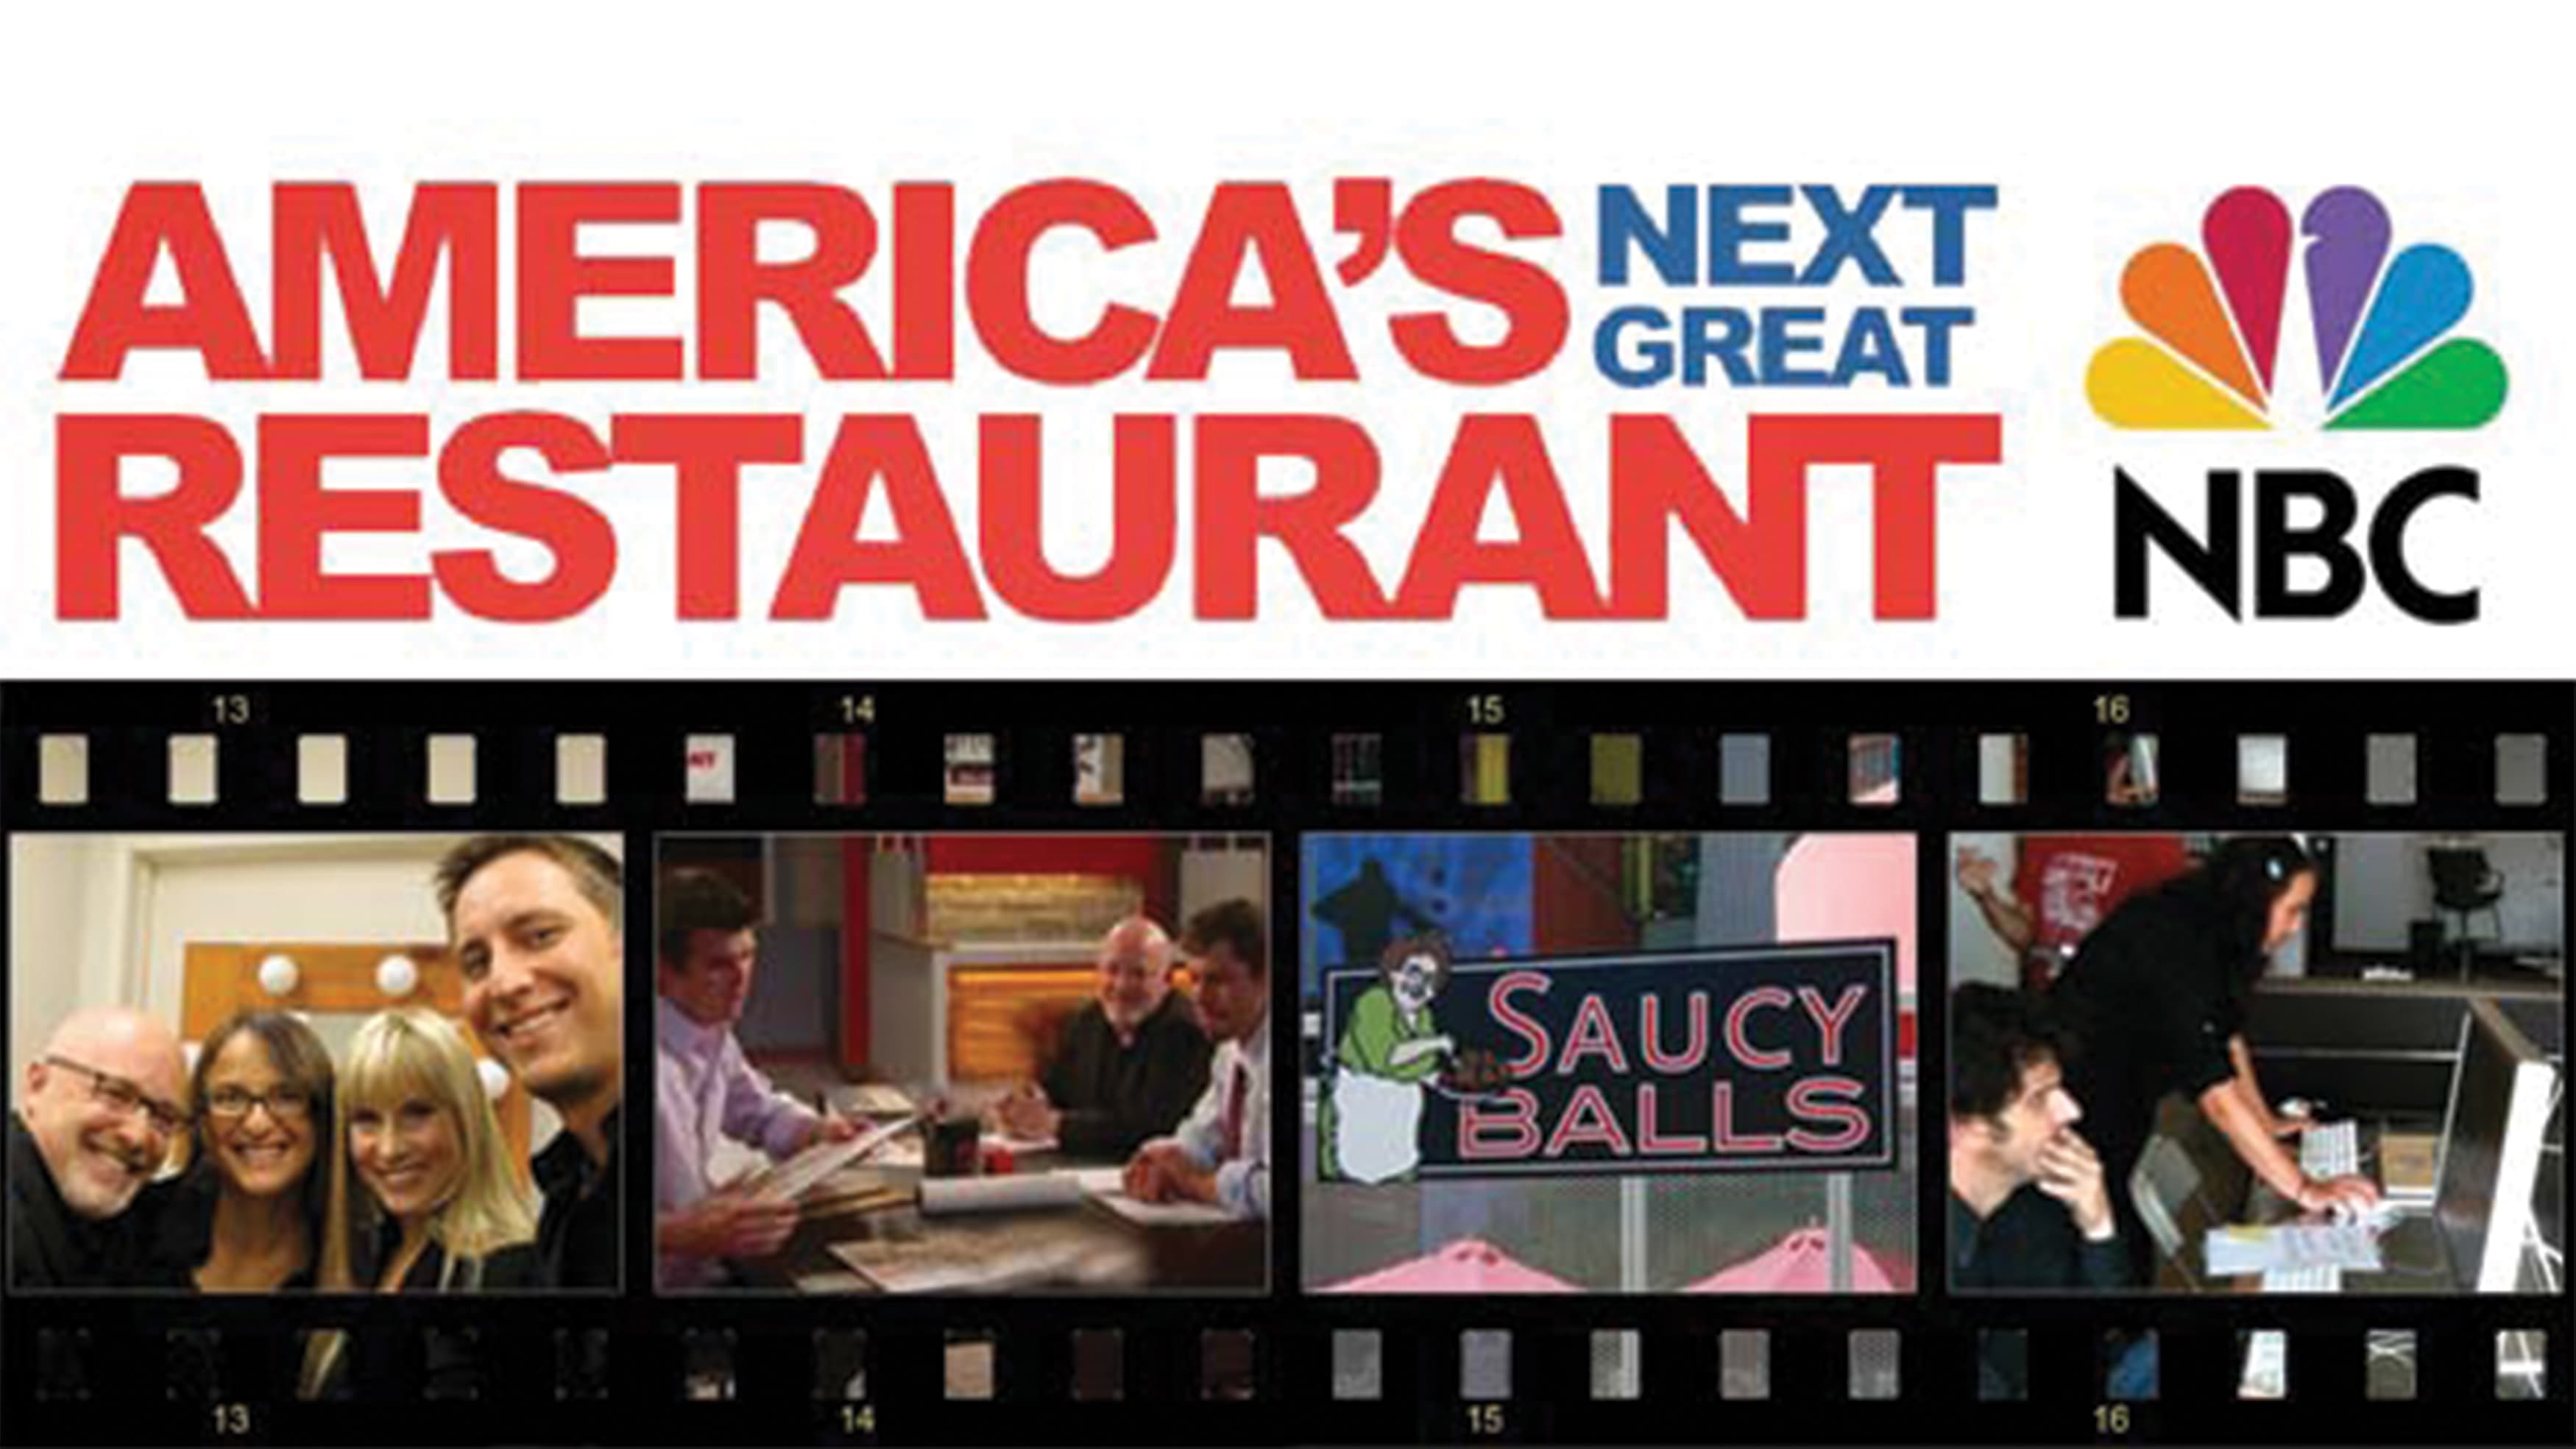 RSM team members appeared in NBC's America's Next Great Restaurant